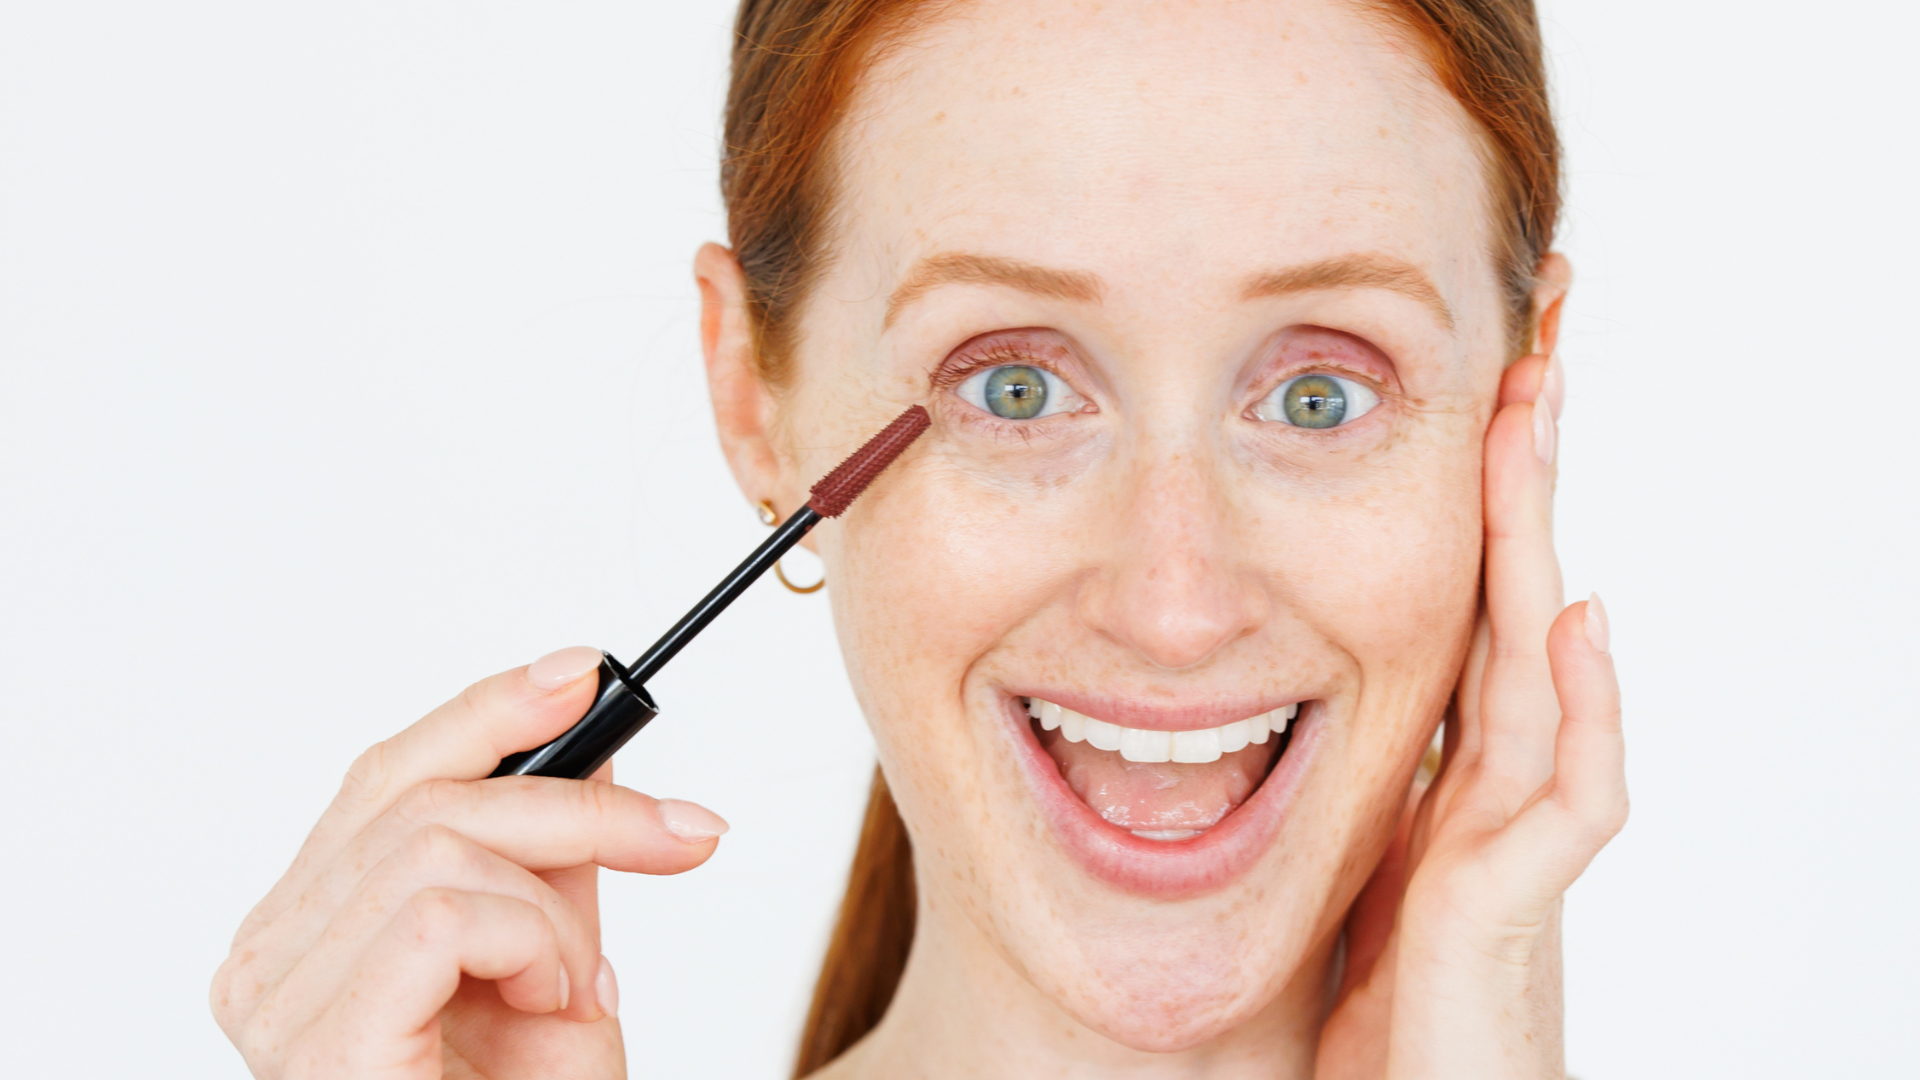 Tubing Mascara: What Is It? And Is It Good for Redheads?